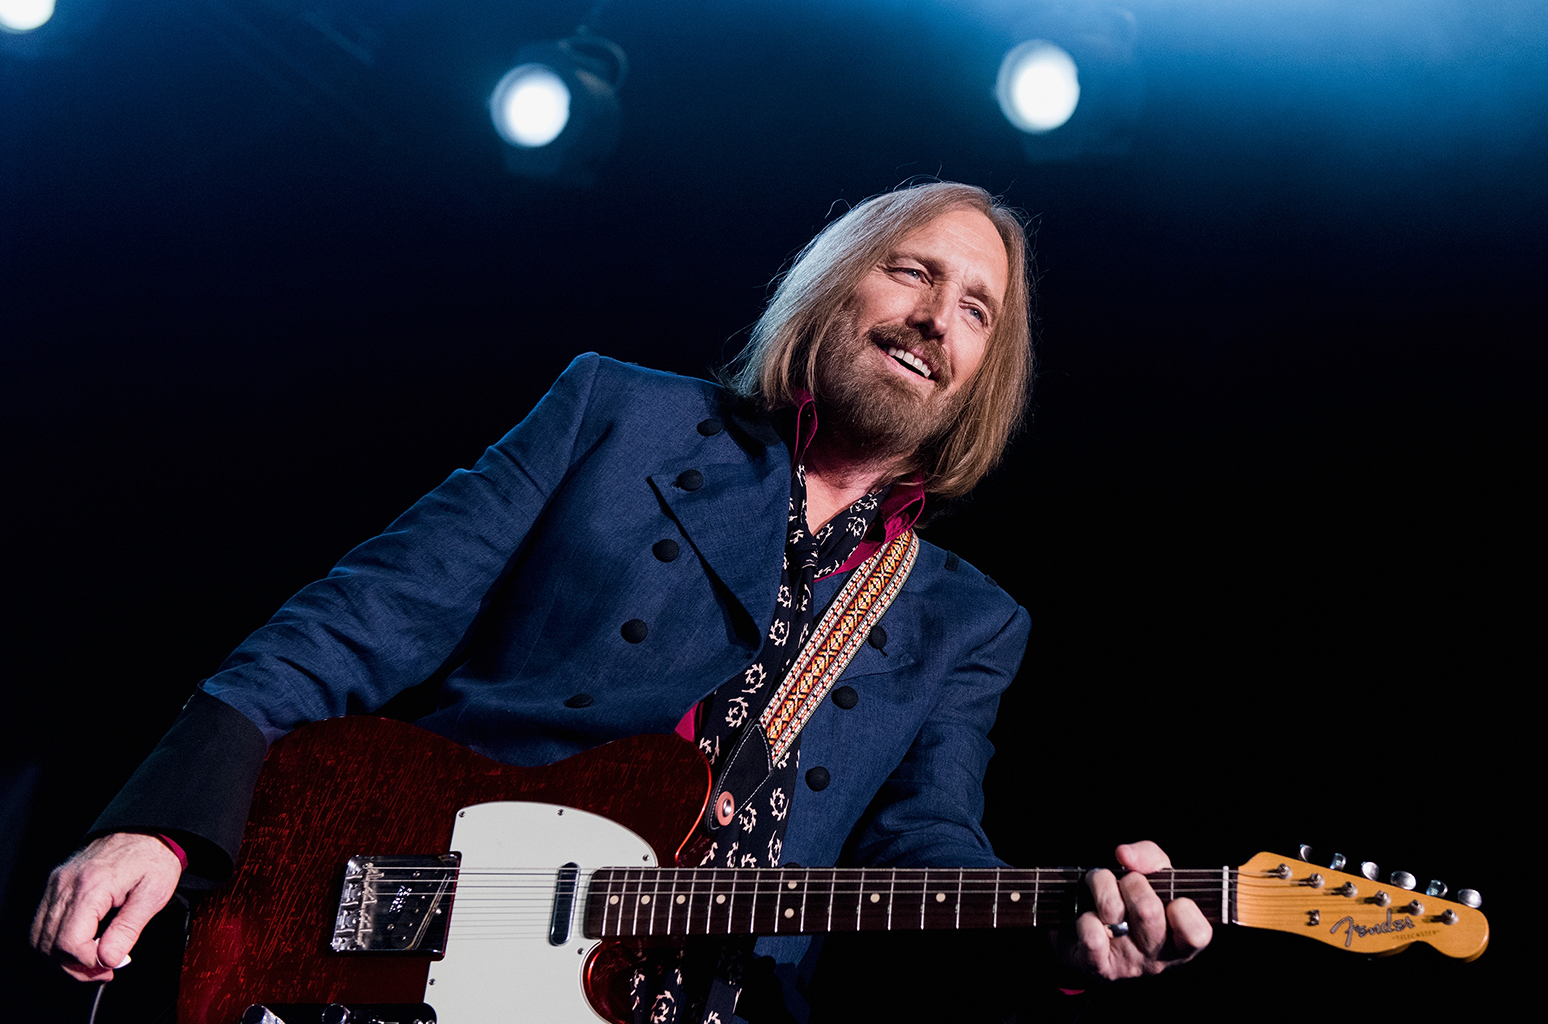 INGLEWOOD, CA - OCTOBER 10:  Tom Petty of Tom Petty And The Heartbreakers performs onstage at The Forum on October 10, 2014 in Inglewood, California.  (Photo by Paul R. Giunta/Getty Images)